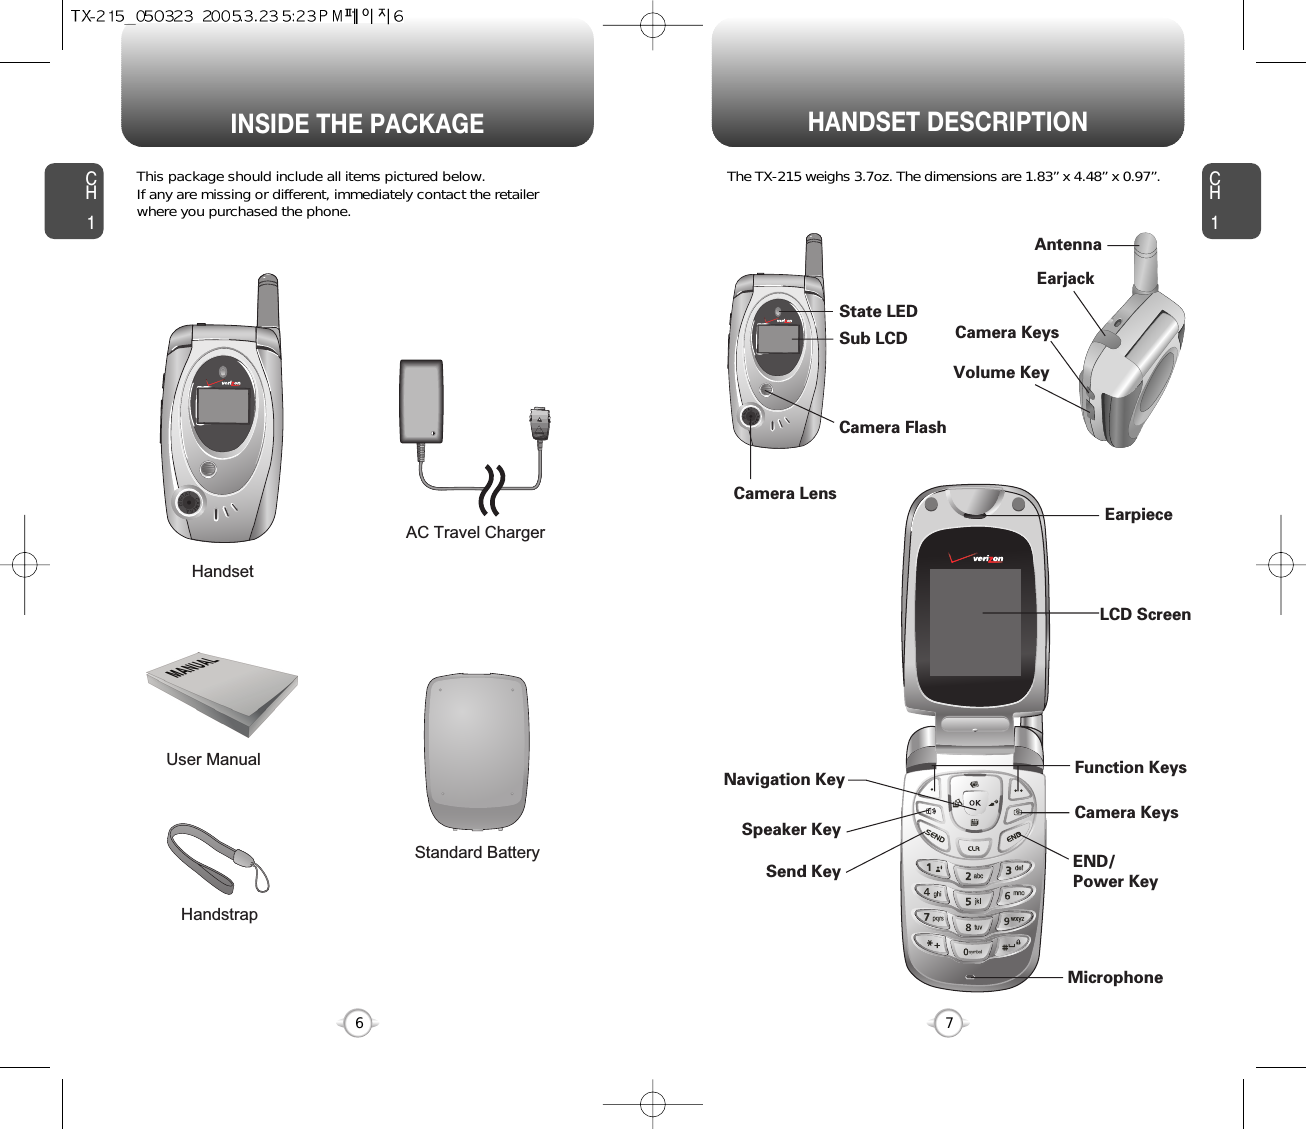 HANDSET DESCRIPTIONCH1This package should include all items pictured below. If any are missing or different, immediately contact the retailer where you purchased the phone.7INSIDE THE PACKAGECH16The TX-215 weighs 3.7oz. The dimensions are 1.83” x 4.48” x 0.97”.HandstrapUser ManualAC Travel ChargerHandsetStandard BatteryAntennaEarjackCamera KeysVolume KeyLCD ScreenFunction KeysCamera KeysEND/Power KeyMicrophoneEarpieceNavigation KeyCamera LensCamera FlashSub LCDState LEDSend KeySpeaker Key